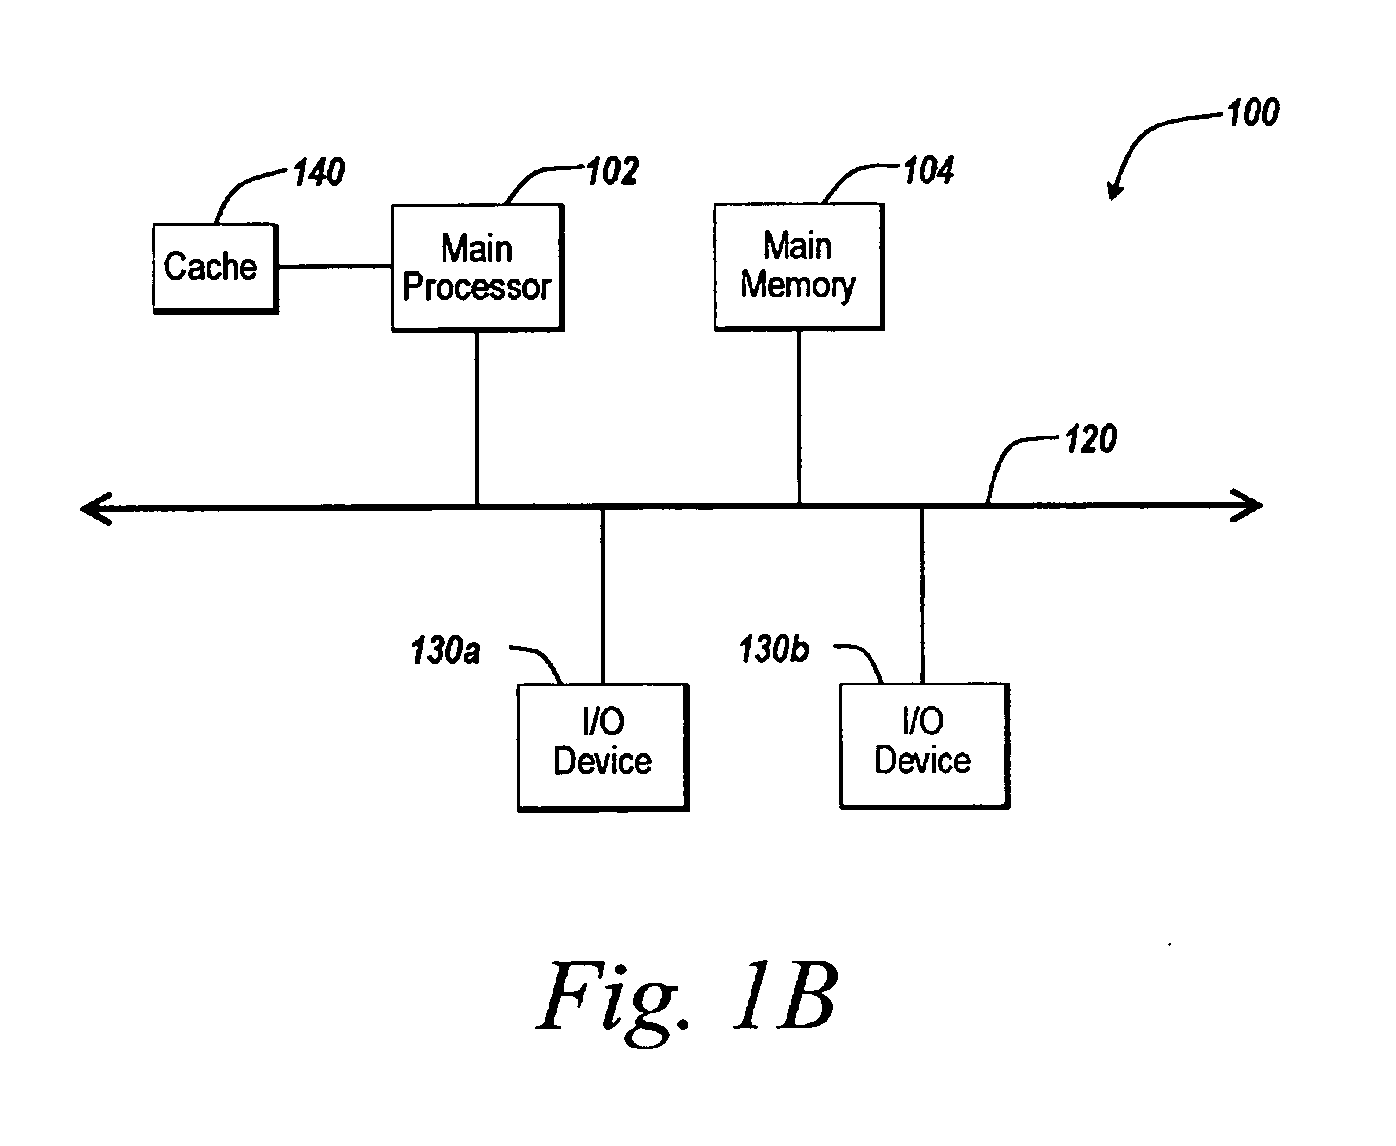 A method and apparatus for reducing disclosure of proprietary data in a networked environment